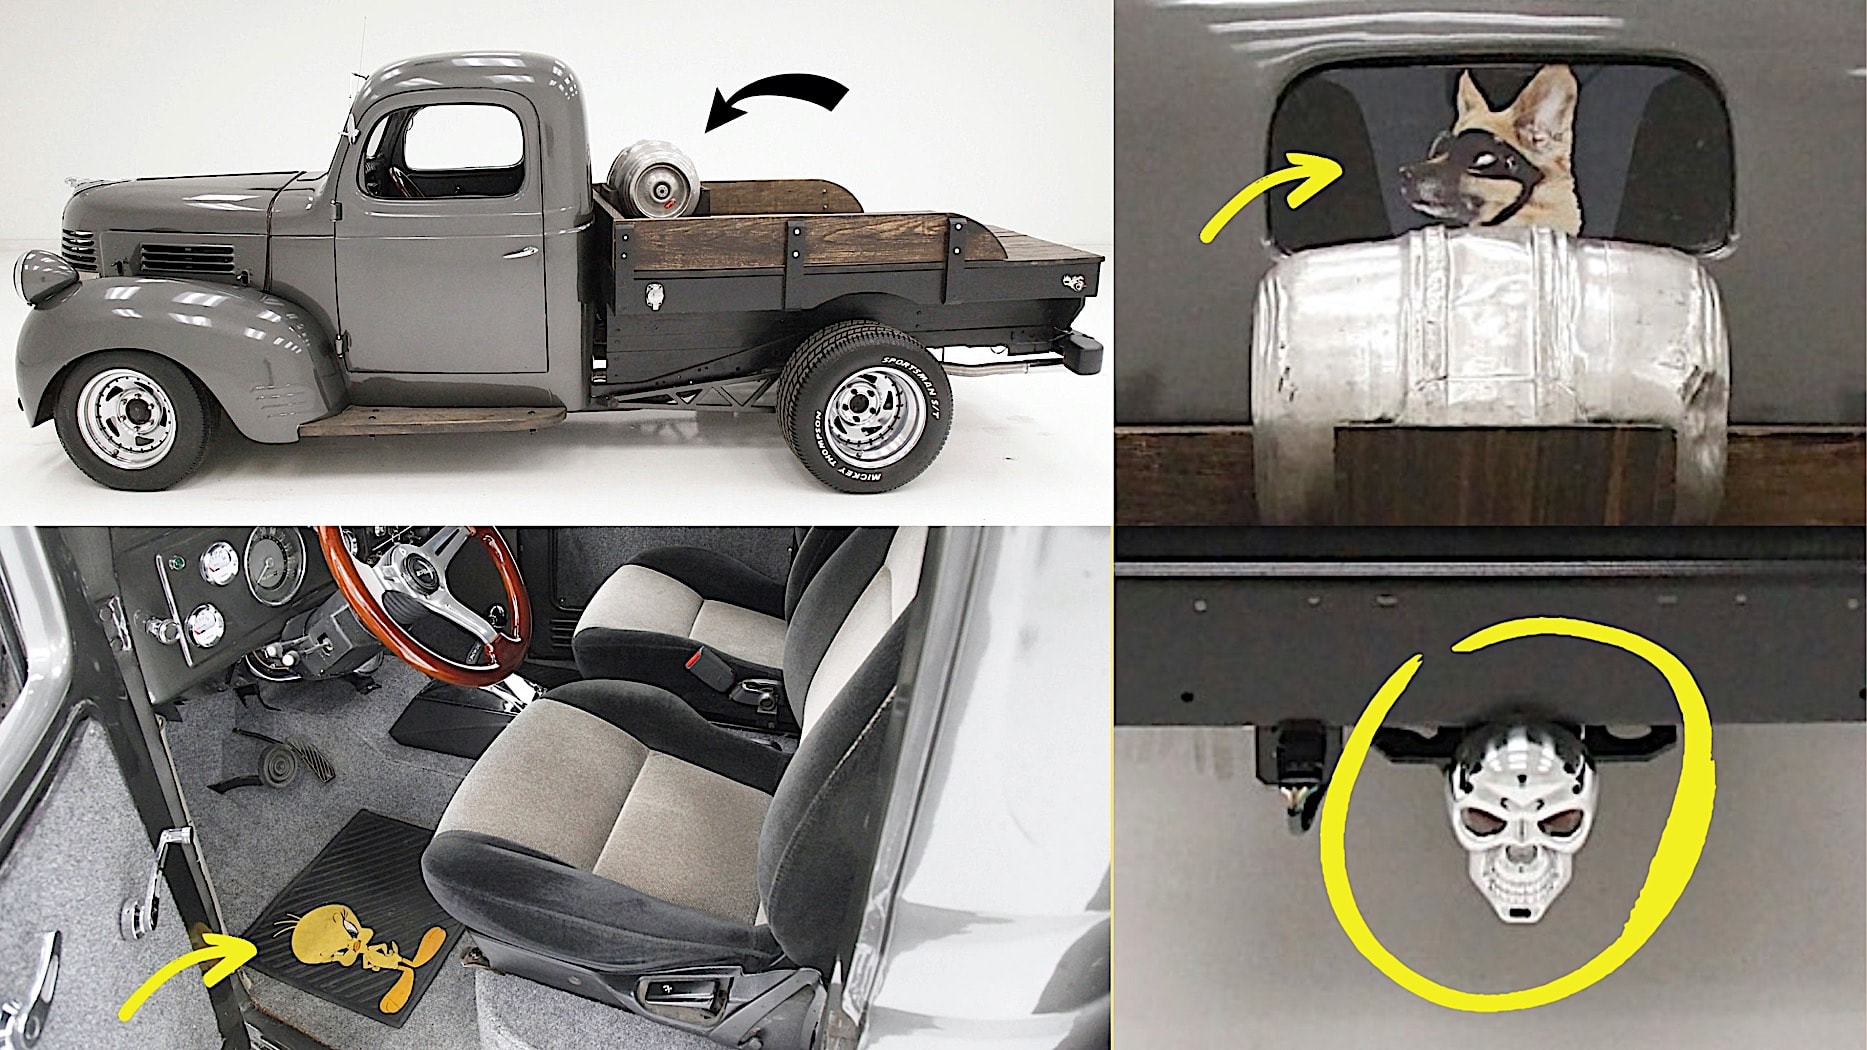 A 1946 Dodge Pickup Is What Tweety, a Beer Keg, and a Chrome Skull Have in  Common - autoevolution